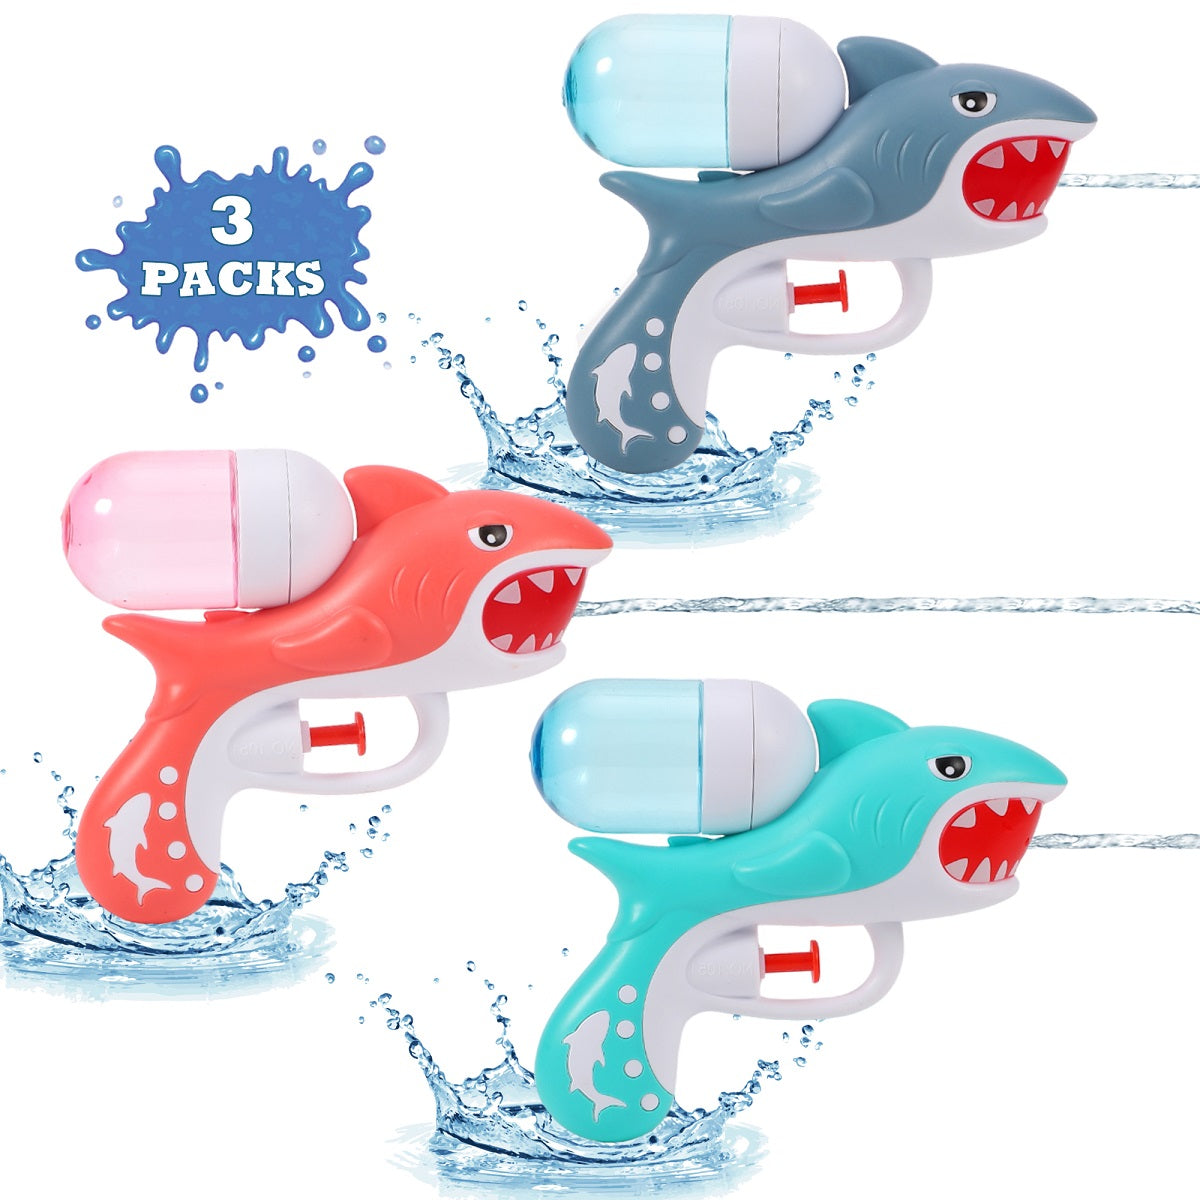 3 Pack Water Guns for Kids,Shark Squirt Water Blaster Guns Toy Summer Swimming Pool Beach Sand Outdoor Water Fighting Play Toys Gifts for Boys Girls(Pink,Blue & Green)